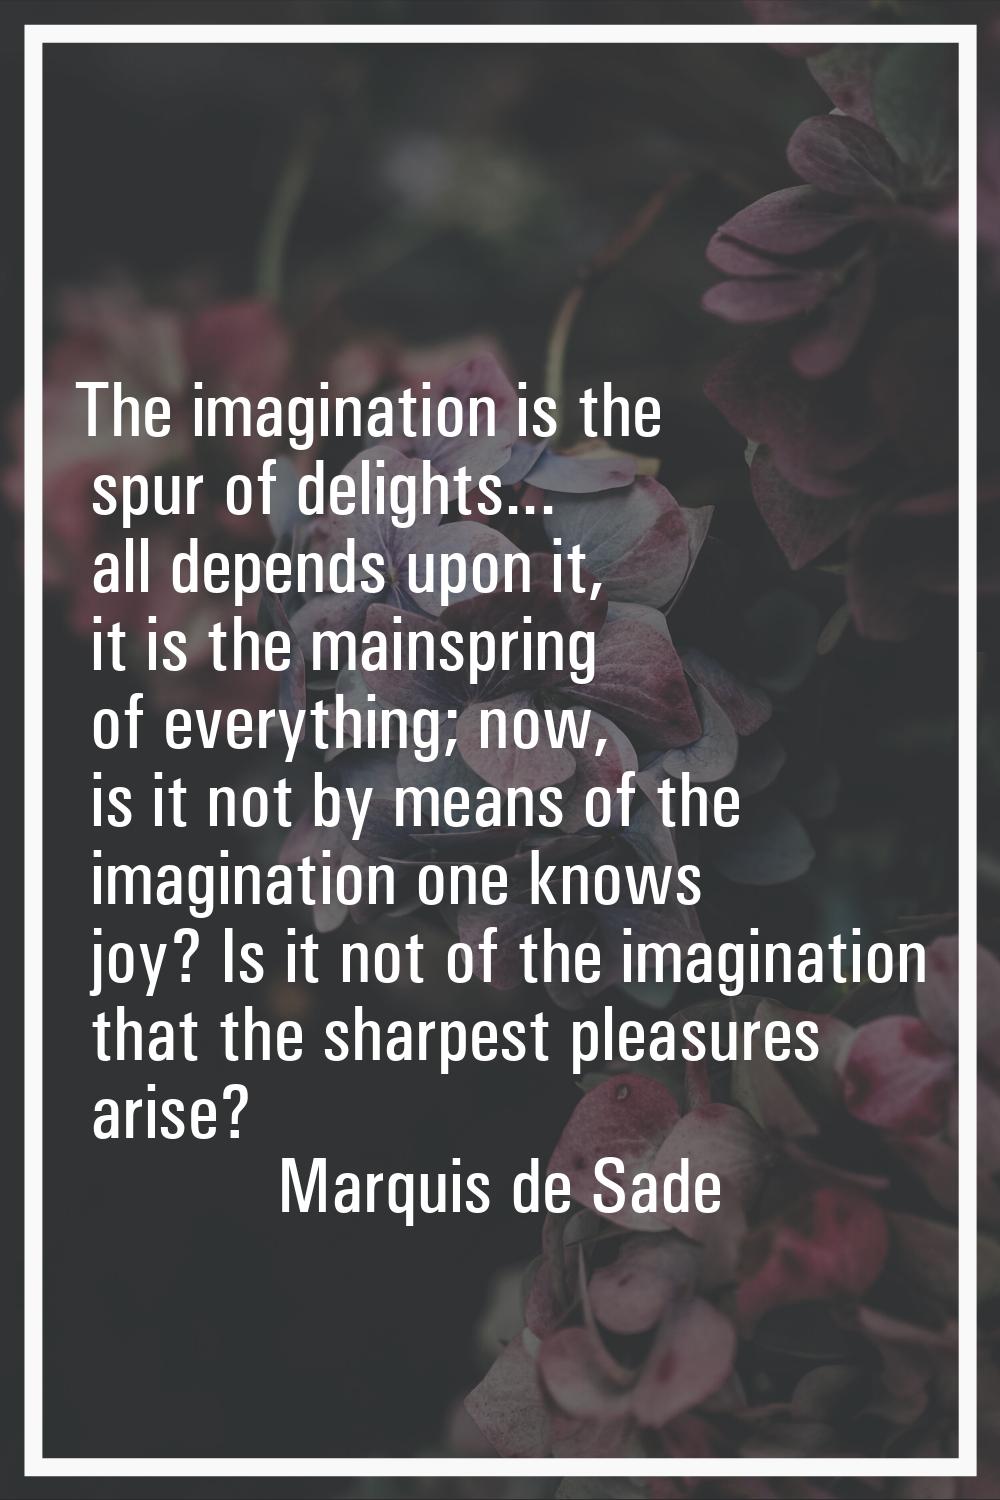 The imagination is the spur of delights... all depends upon it, it is the mainspring of everything;